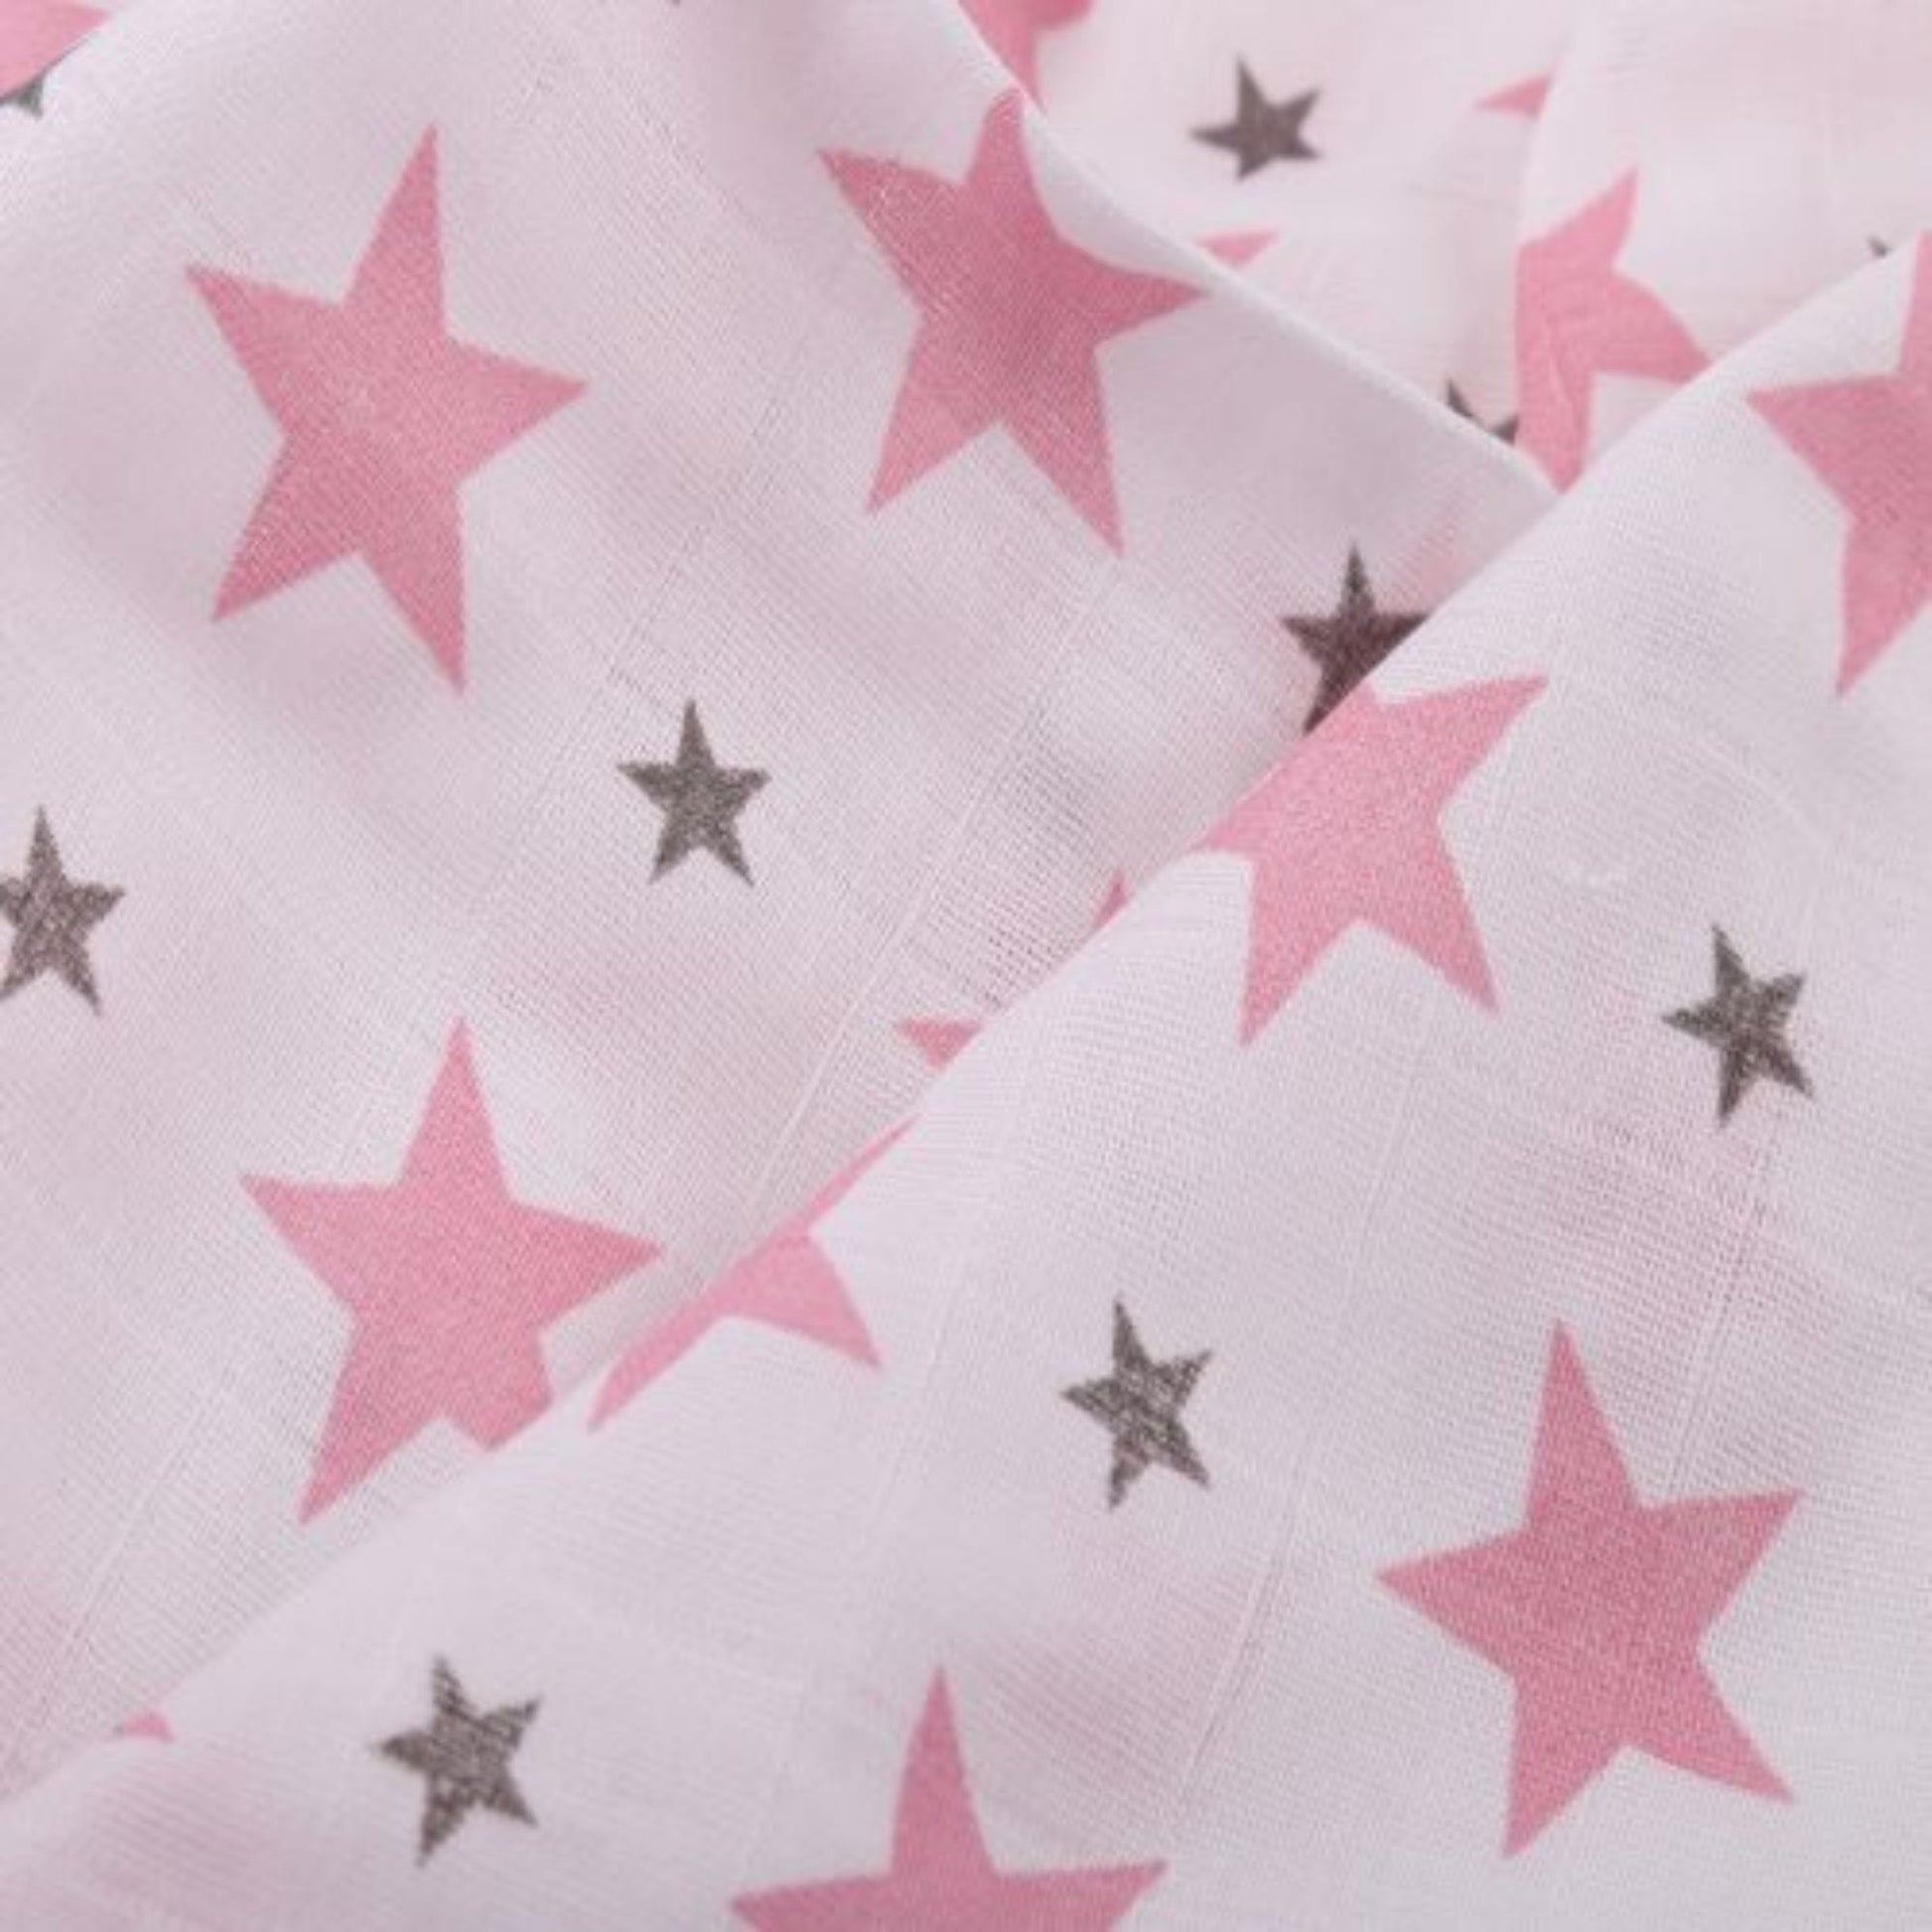 Chevron Stripes 100% Cotton Muslin Swaddle Pack Of 5 (Pink All, Dots) 100 x 100 CM - haus & kinder